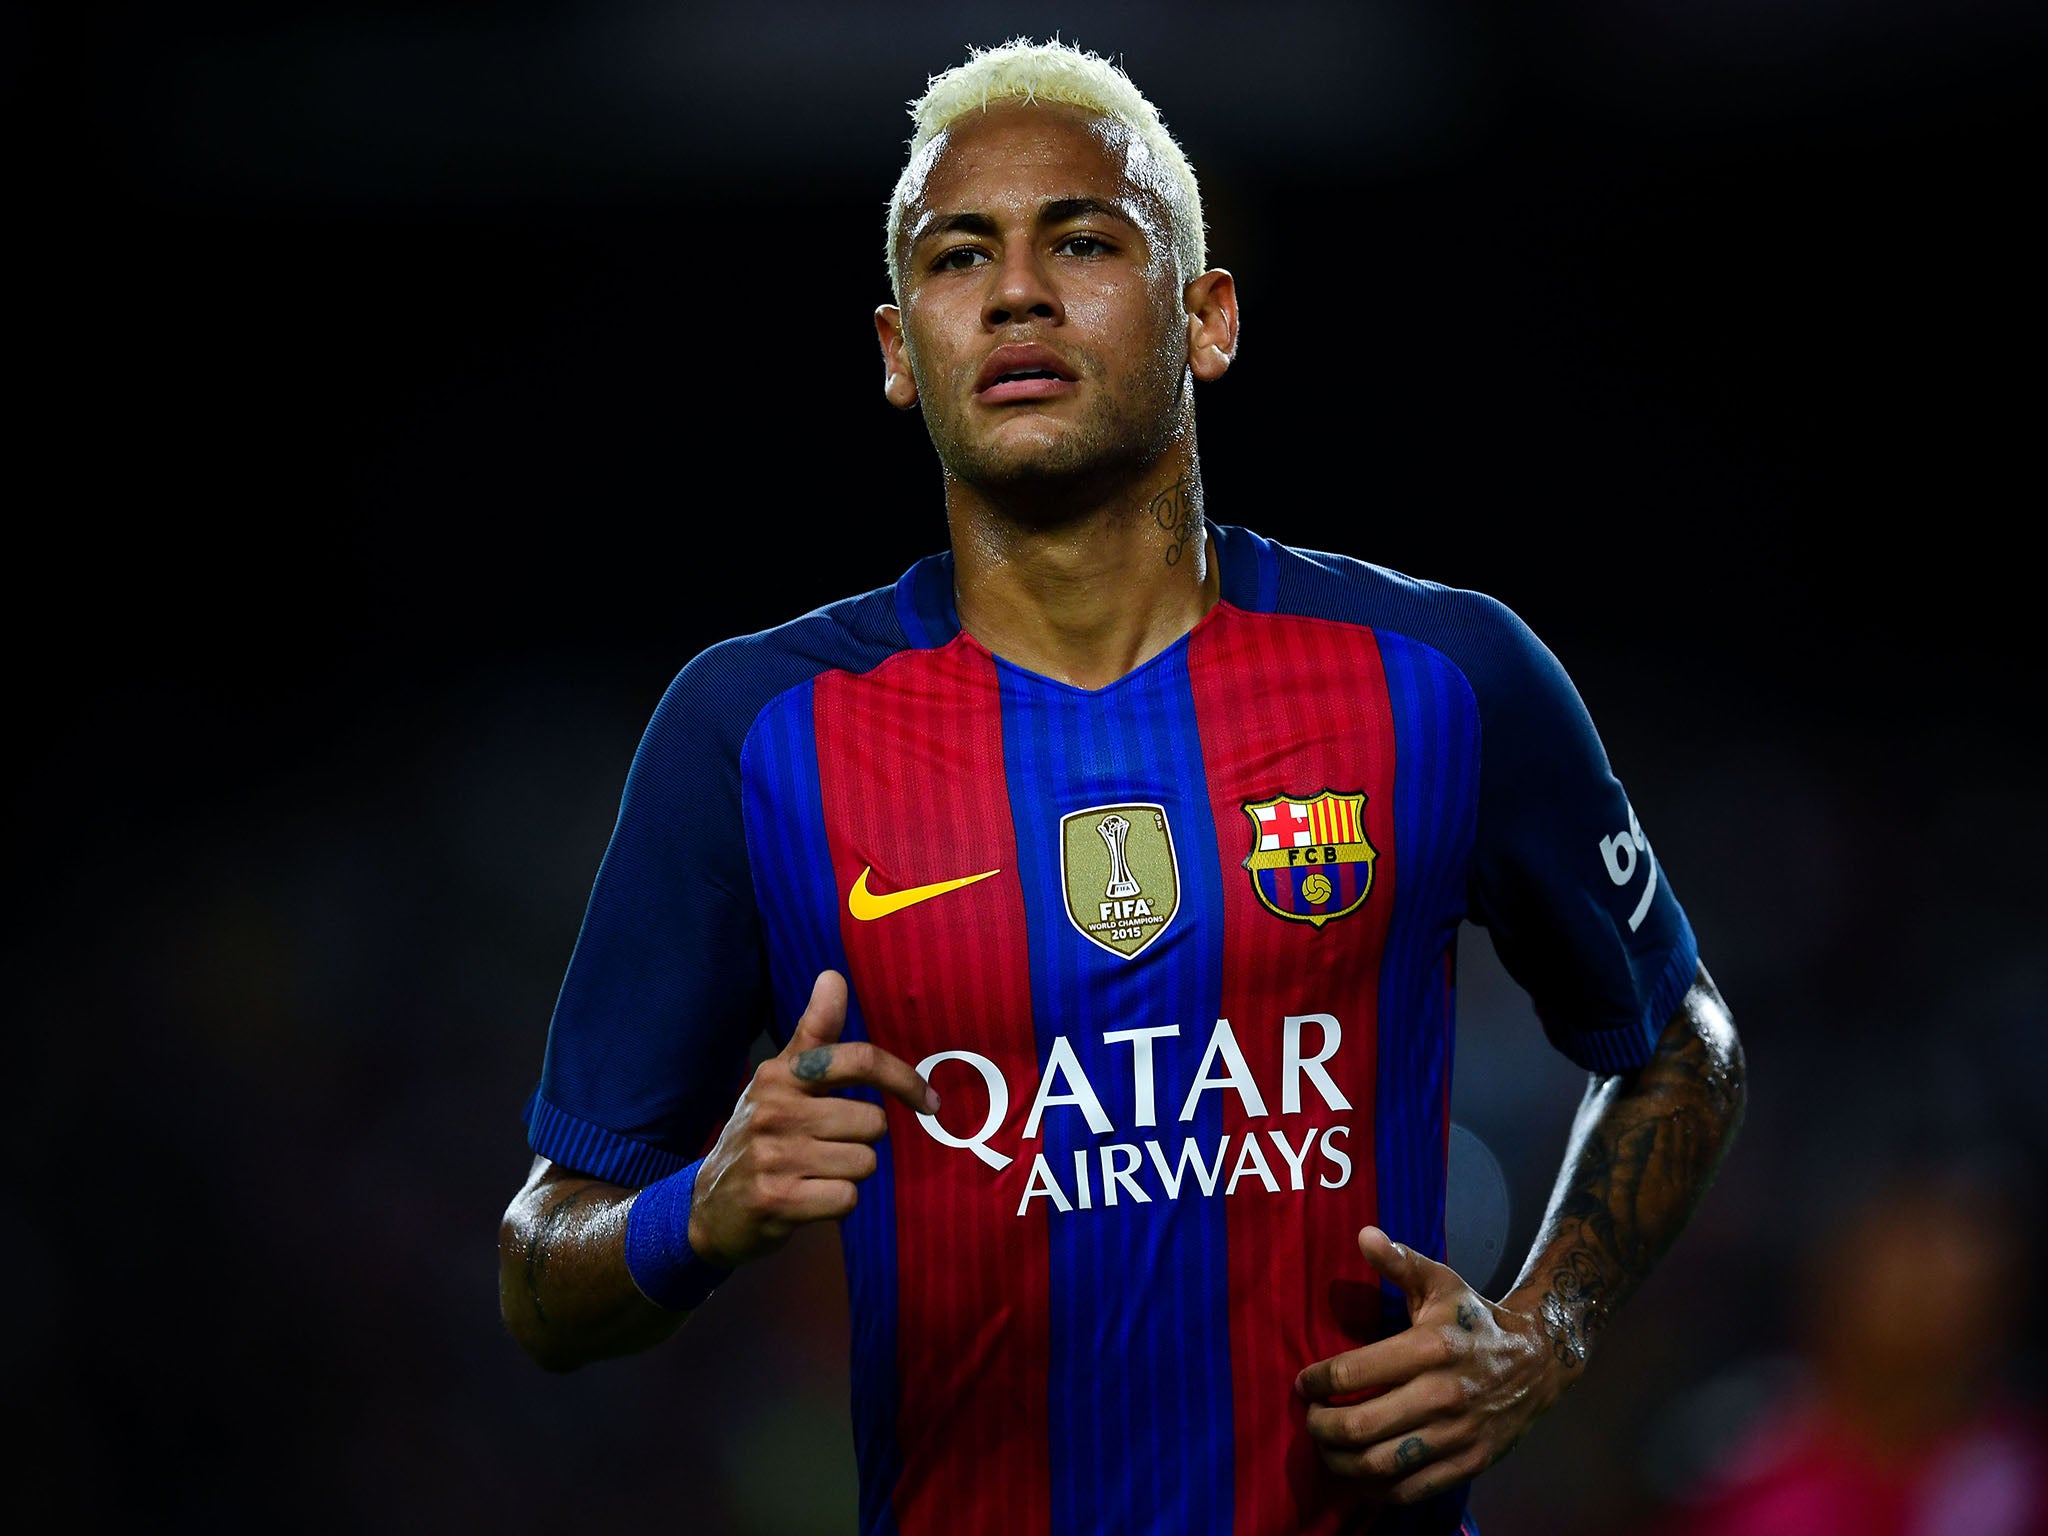 Neymar made his first Barcelona appearance of the season in the shock 2-1 defeat to Alaves